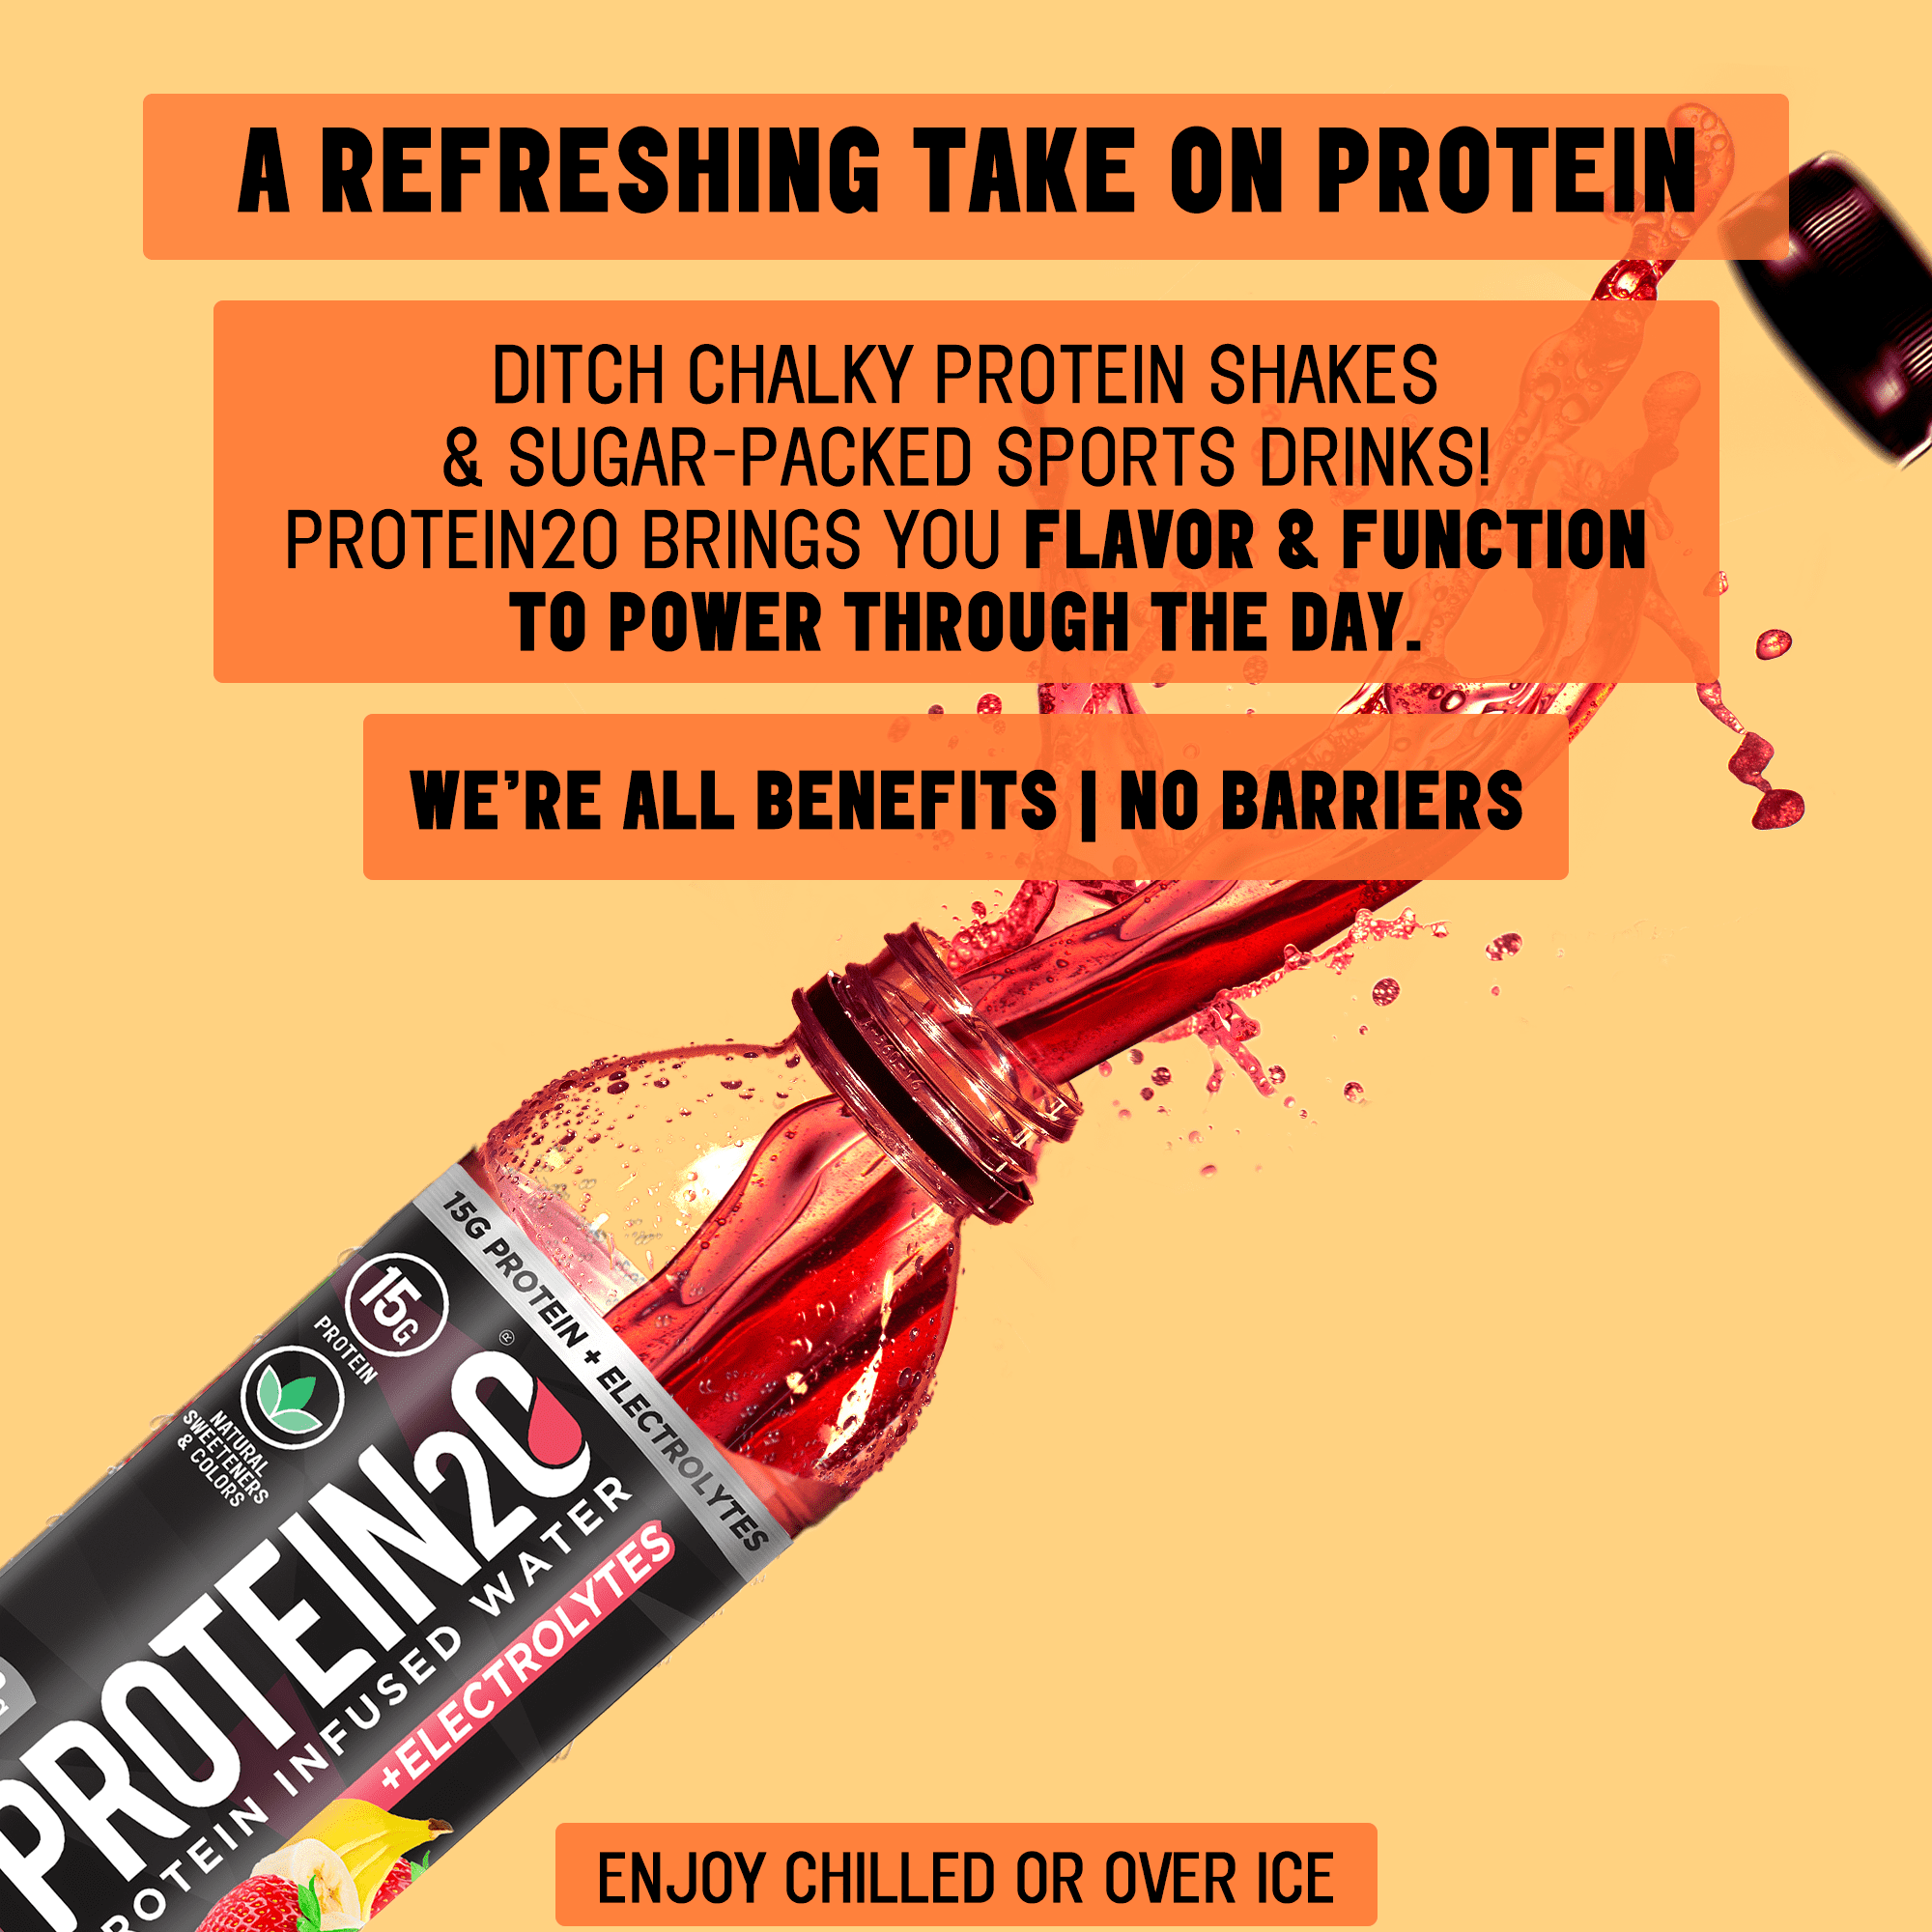 Protein2o 15g Whey Protein Isolate Infused Water, Ready To Drink, Gluten  Free, Lactose Free, No Artificial Sweeteners, Flavor Fusion Variety Pack